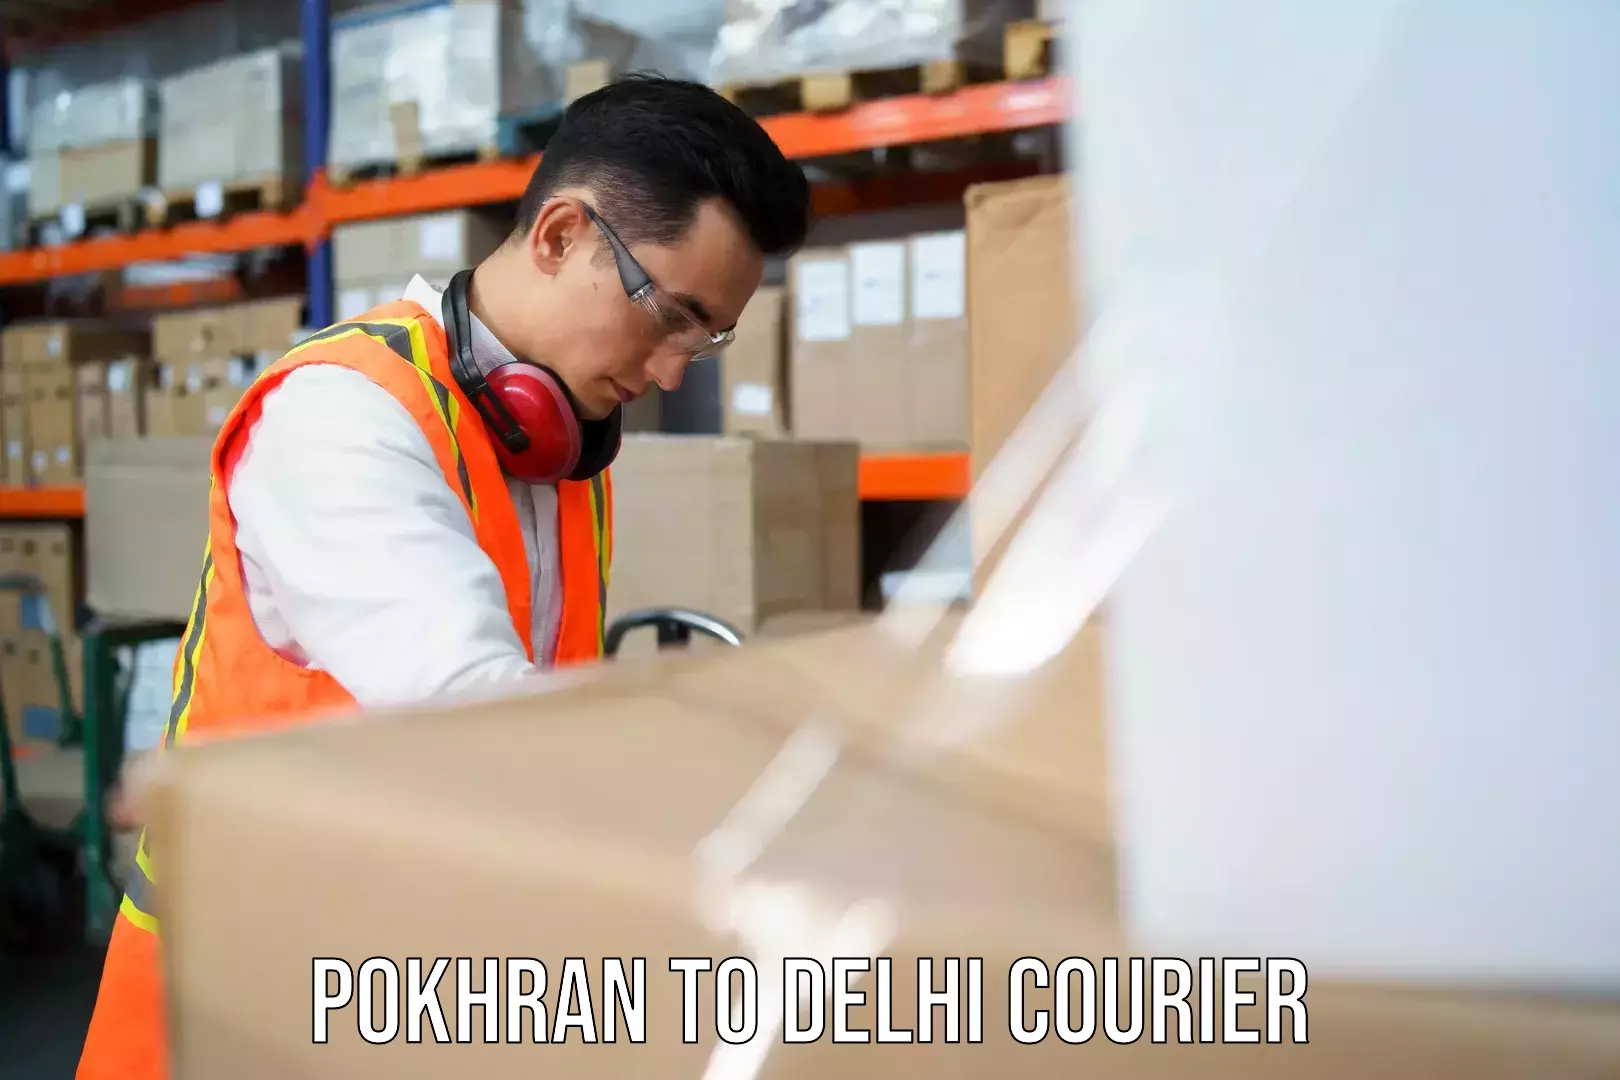 State-of-the-art courier technology Pokhran to Subhash Nagar